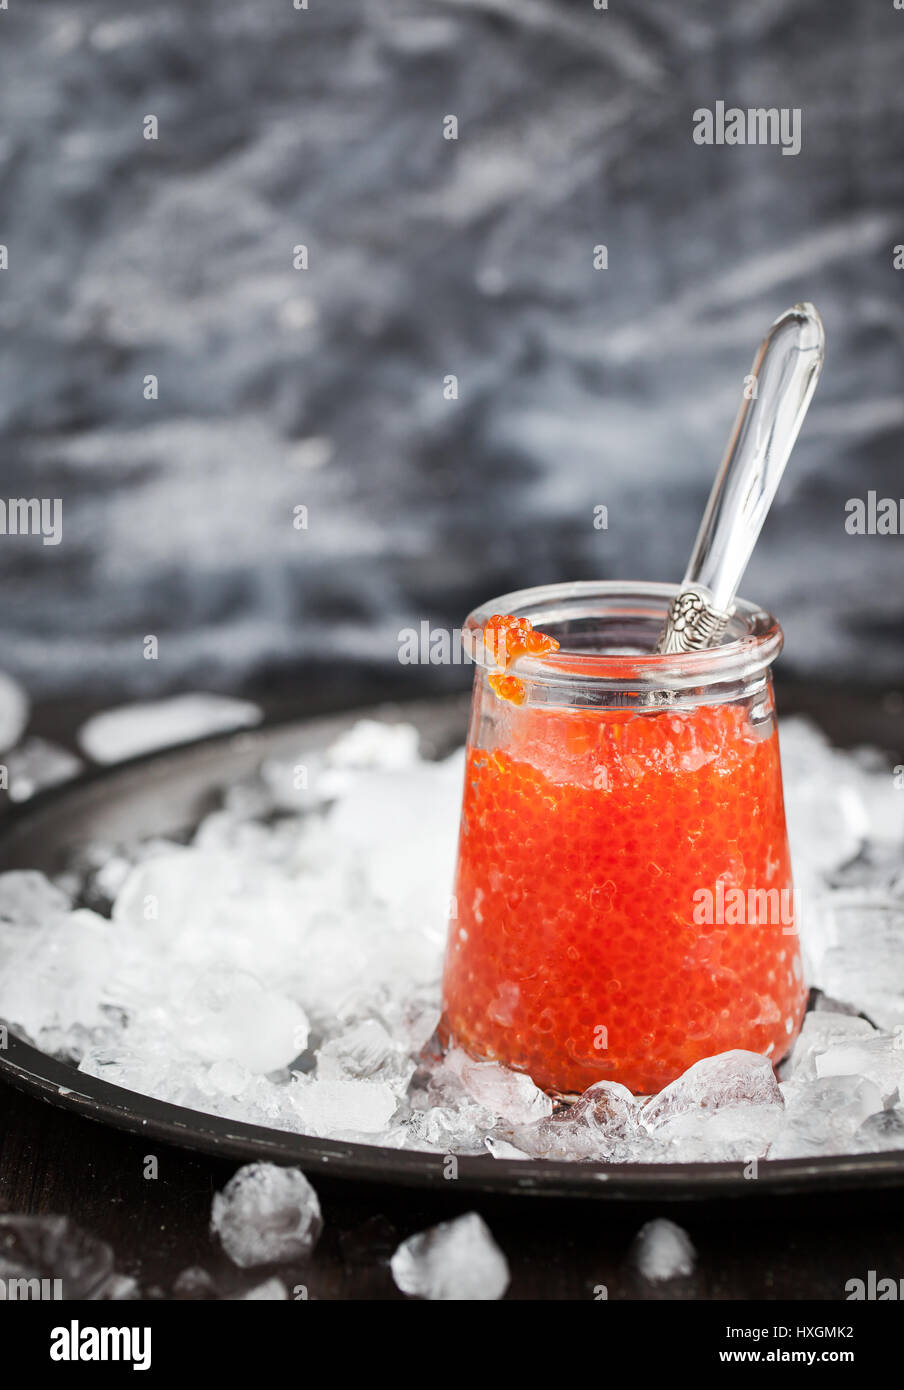 Jar full of delicious red caviar Stock Photo